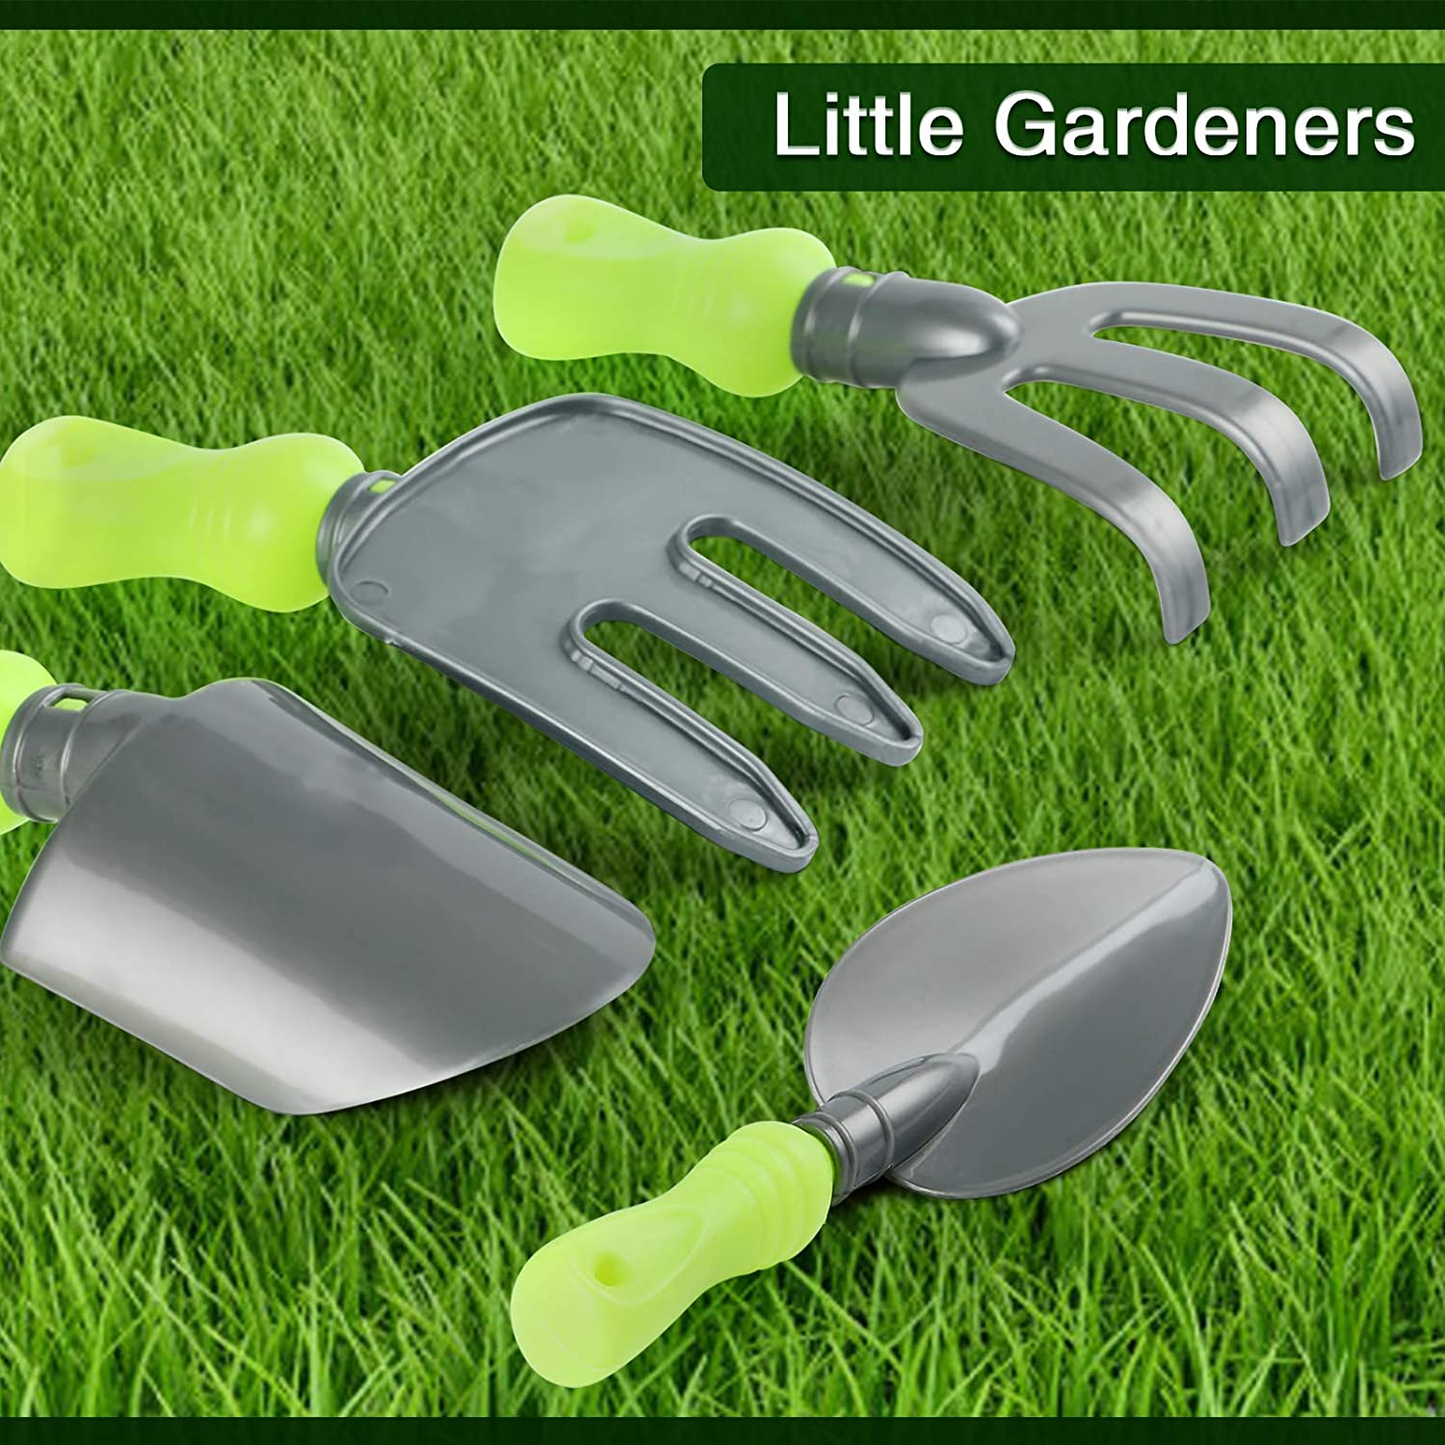 LEMESO Kids Gardening Tools Kit Set, 20 Pcs Plastic Garden Toys with Flower Pots, Watering Can, Shovel, Rake, Trowel and Other Garden Tools, Kids Outdoor Activity Game Tools Kit, Little Gardener Toys